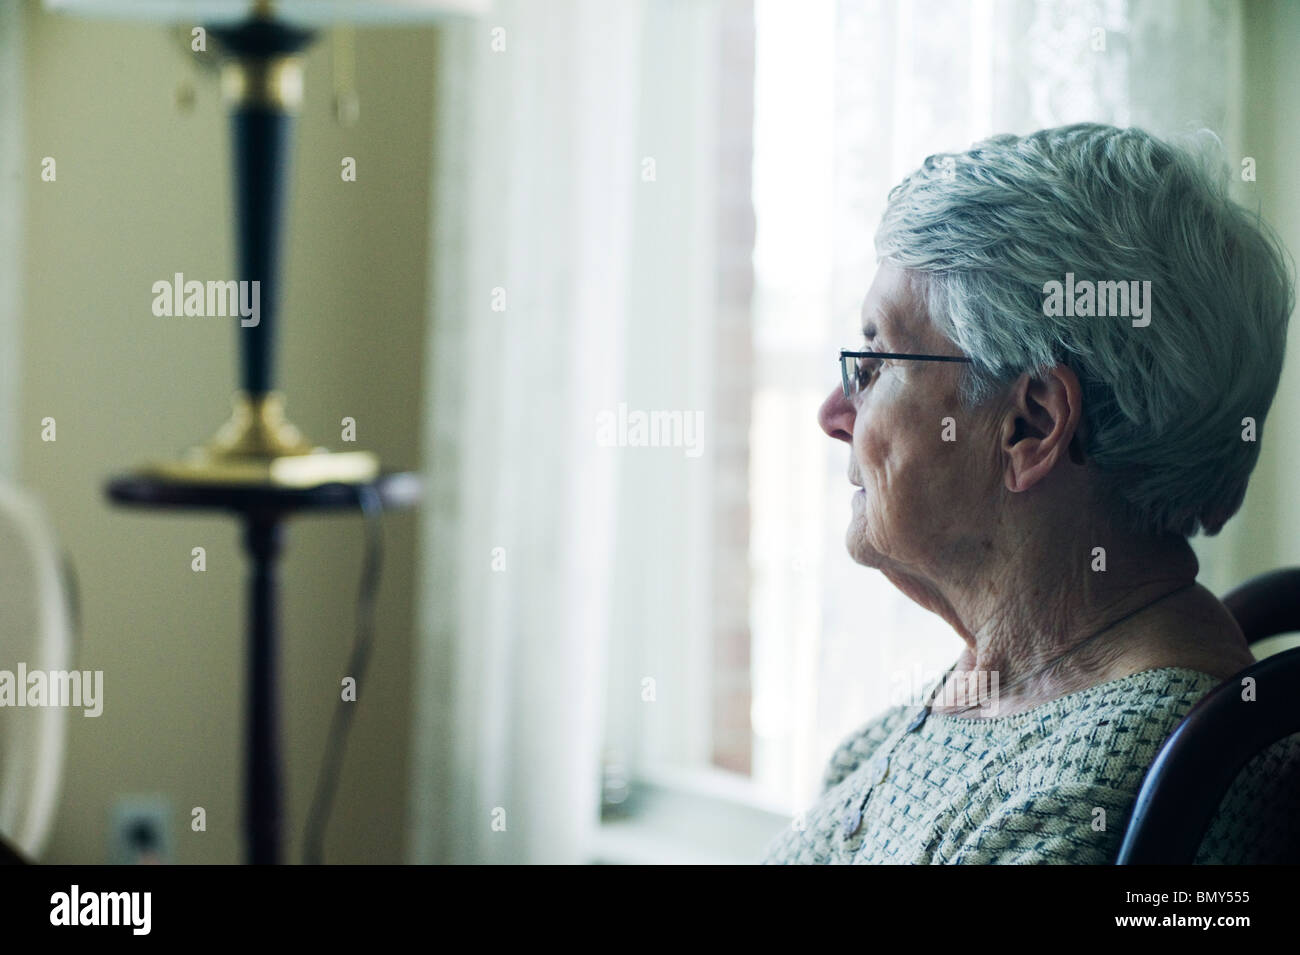 Profile of old woman sitting in chair, looking straight ahead. Stock Photo